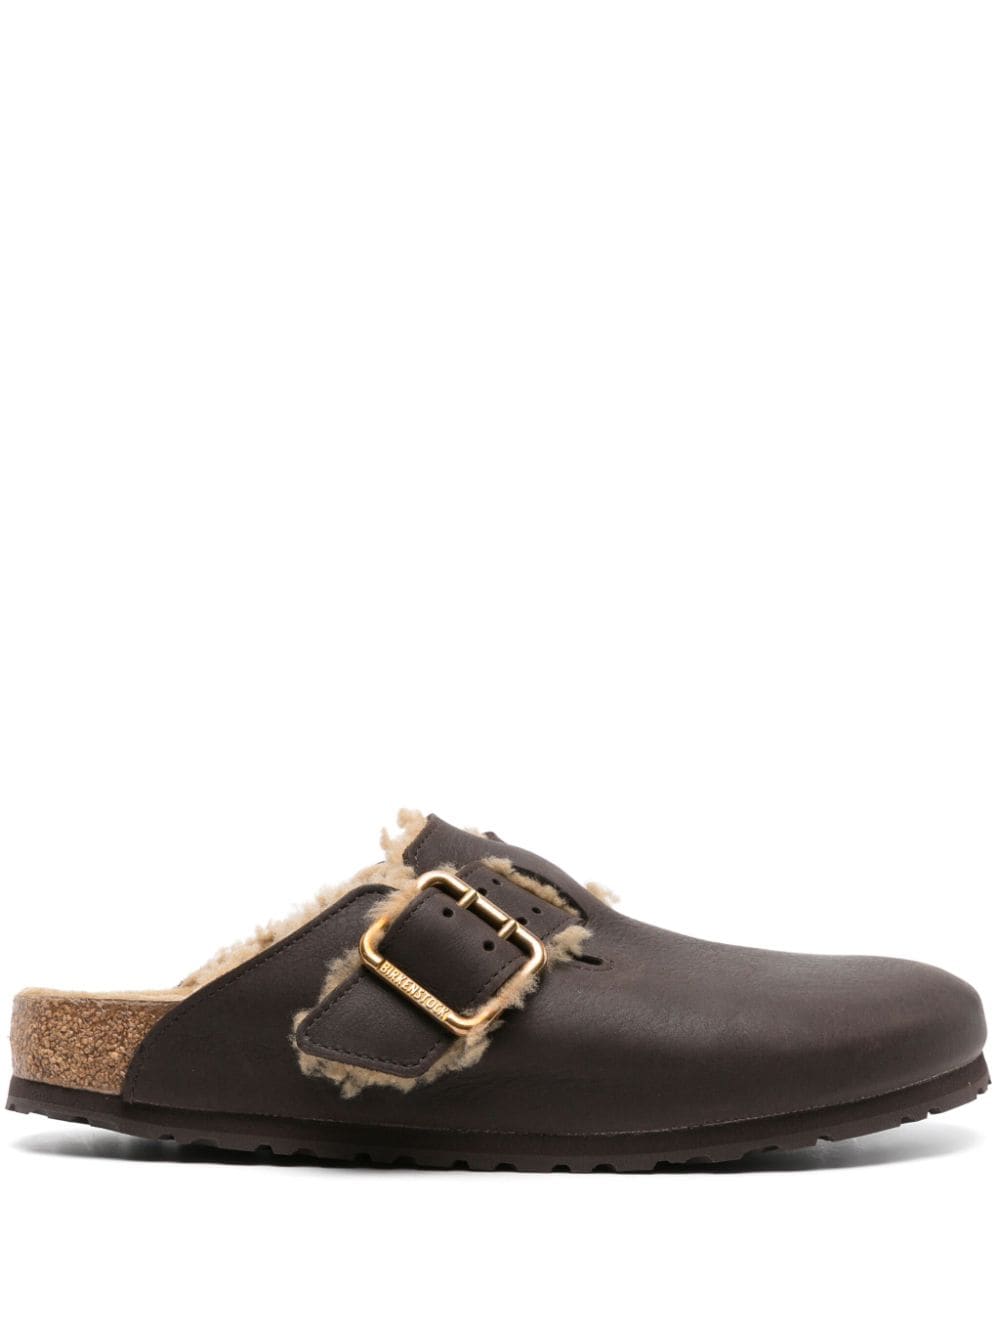 Birkenstock Boston Shearling-lining Leather Clog In Brown